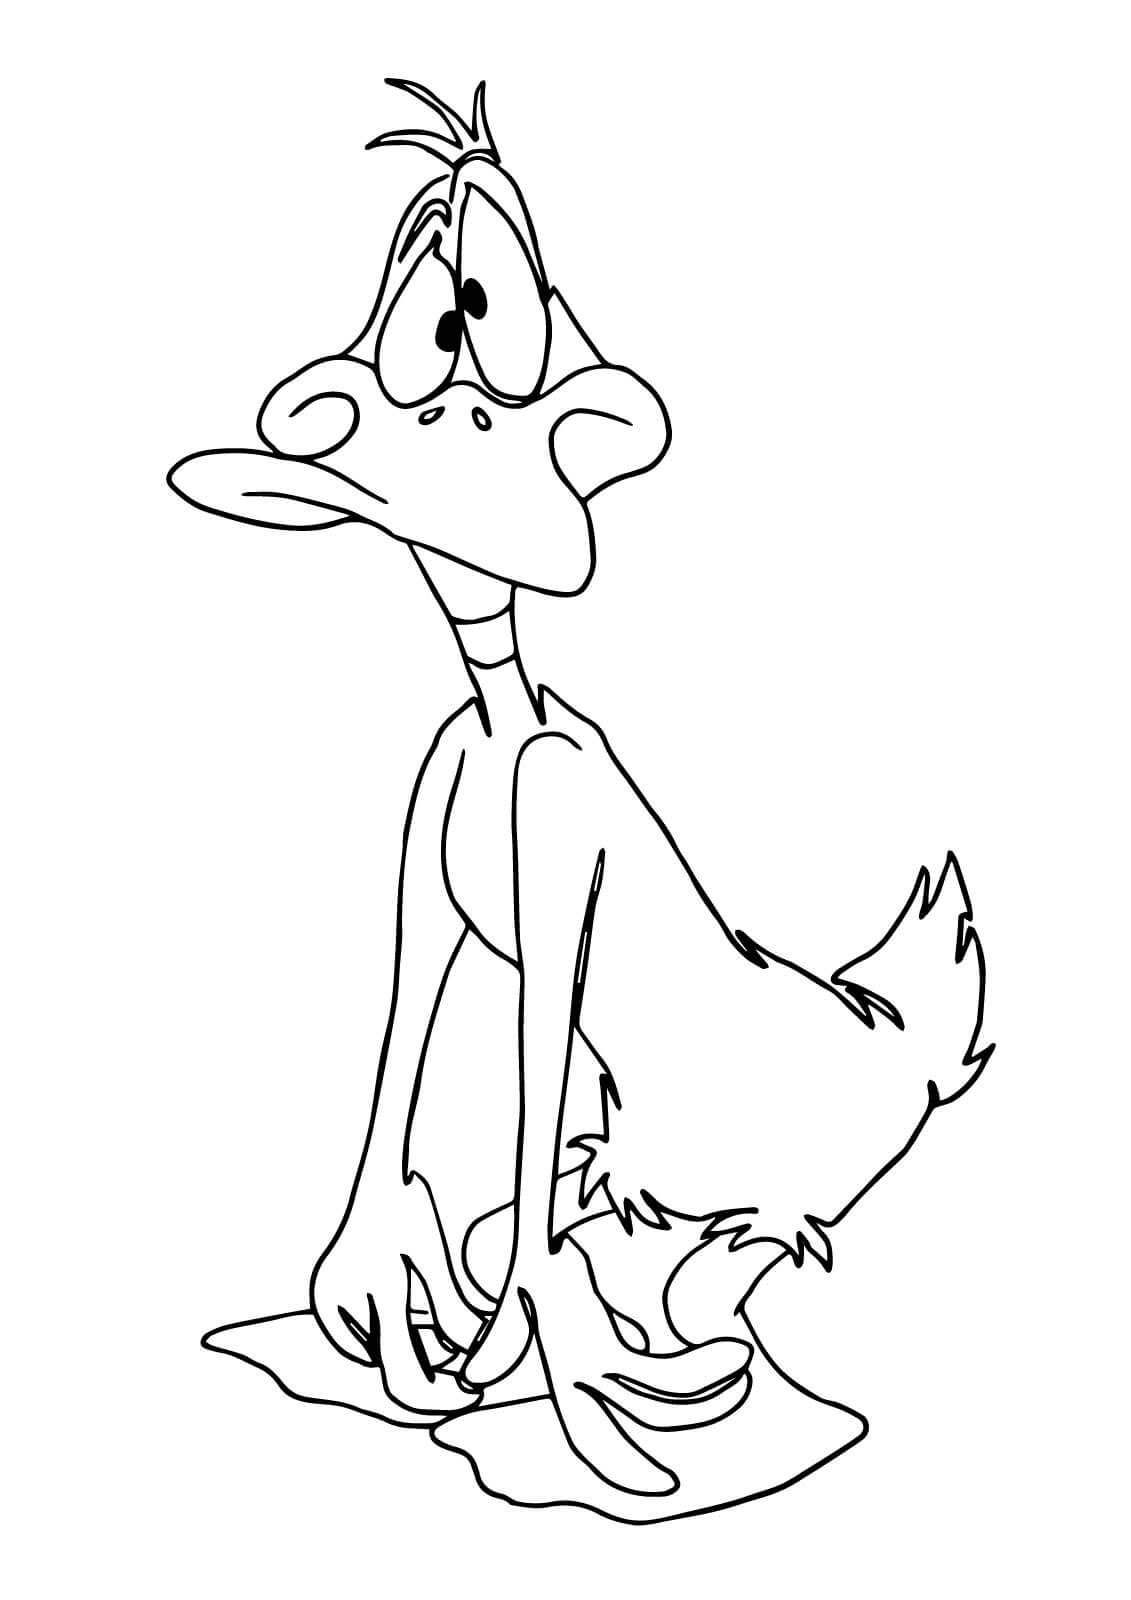 Confused Daffy Duck Coloring Pages